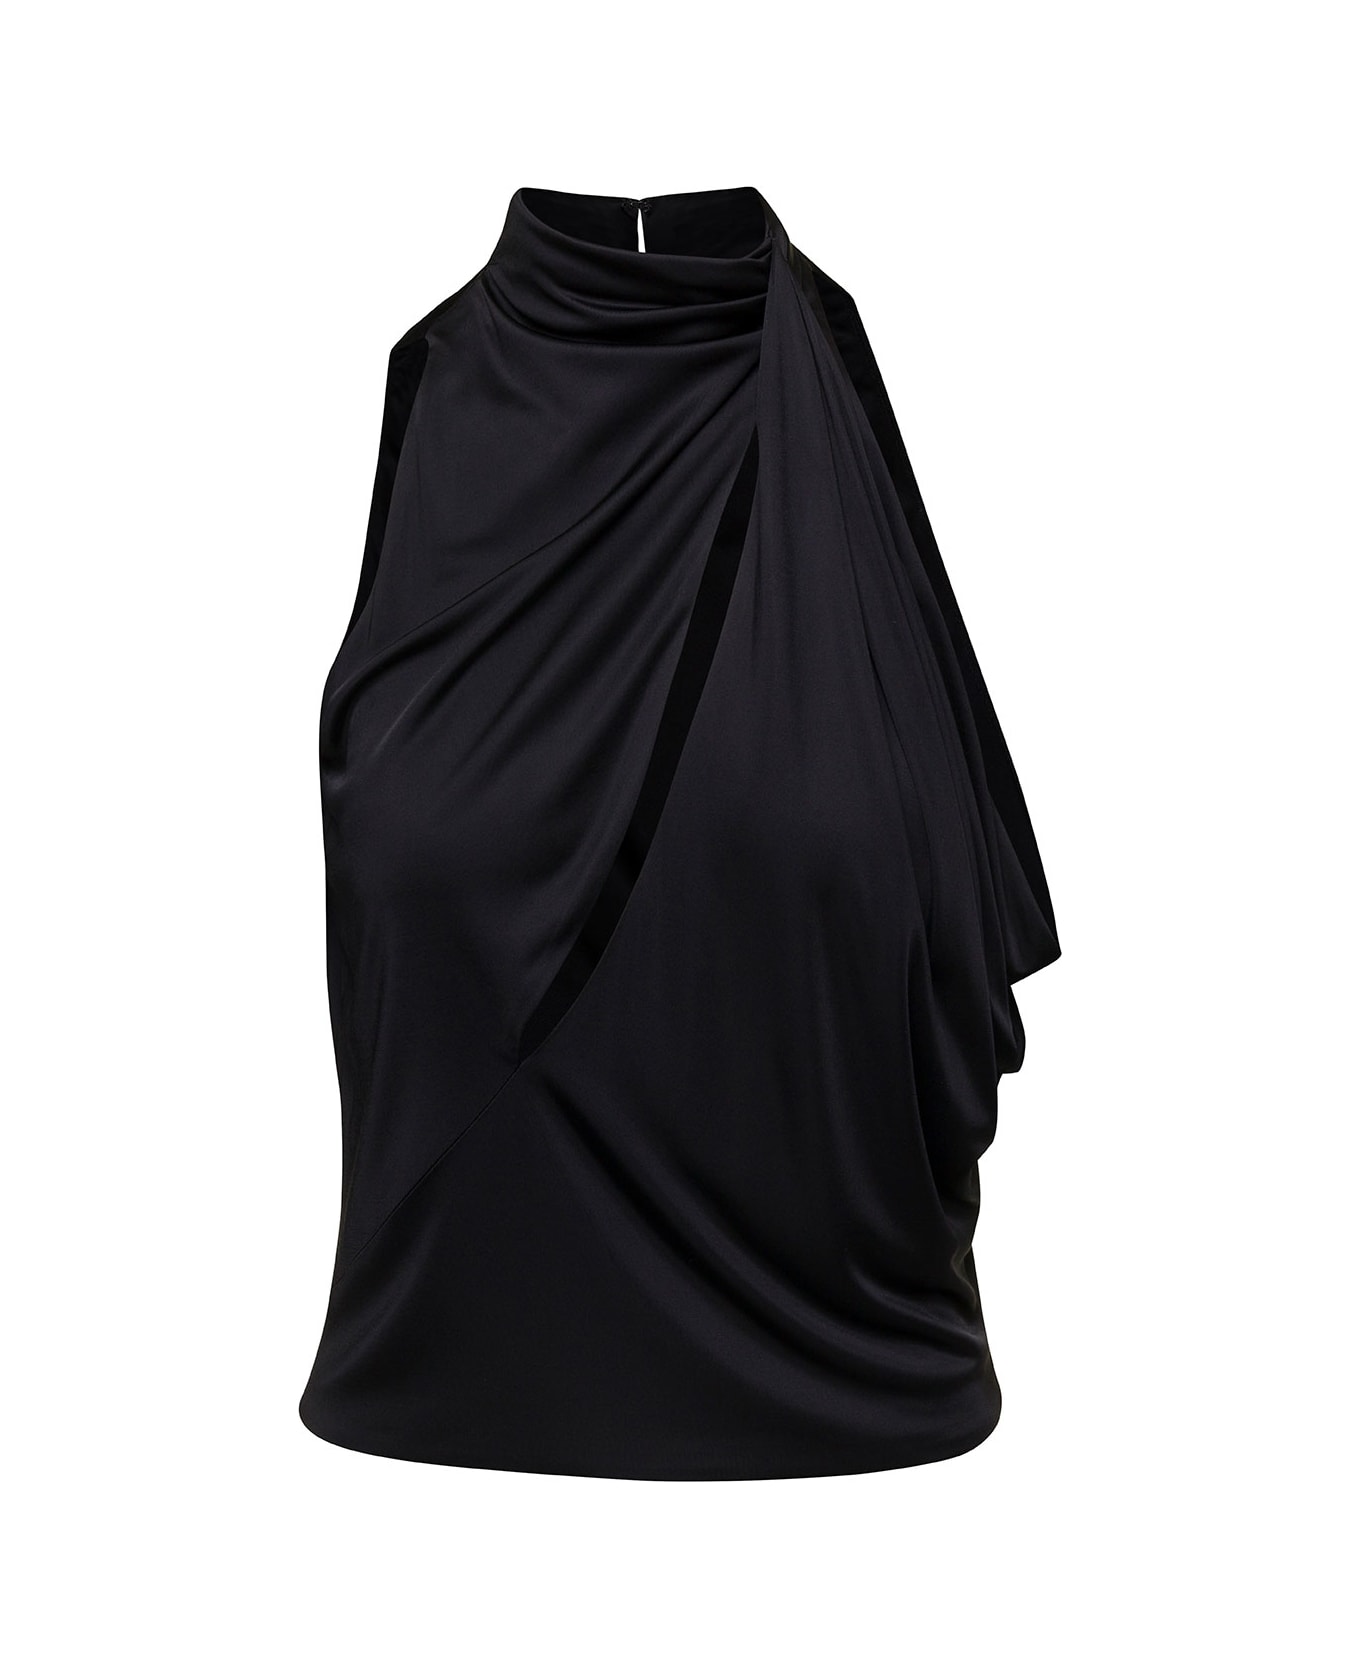 Versace Black Halterneck Top With Diagonal Cut-out In Viscose Woman - Black トップス